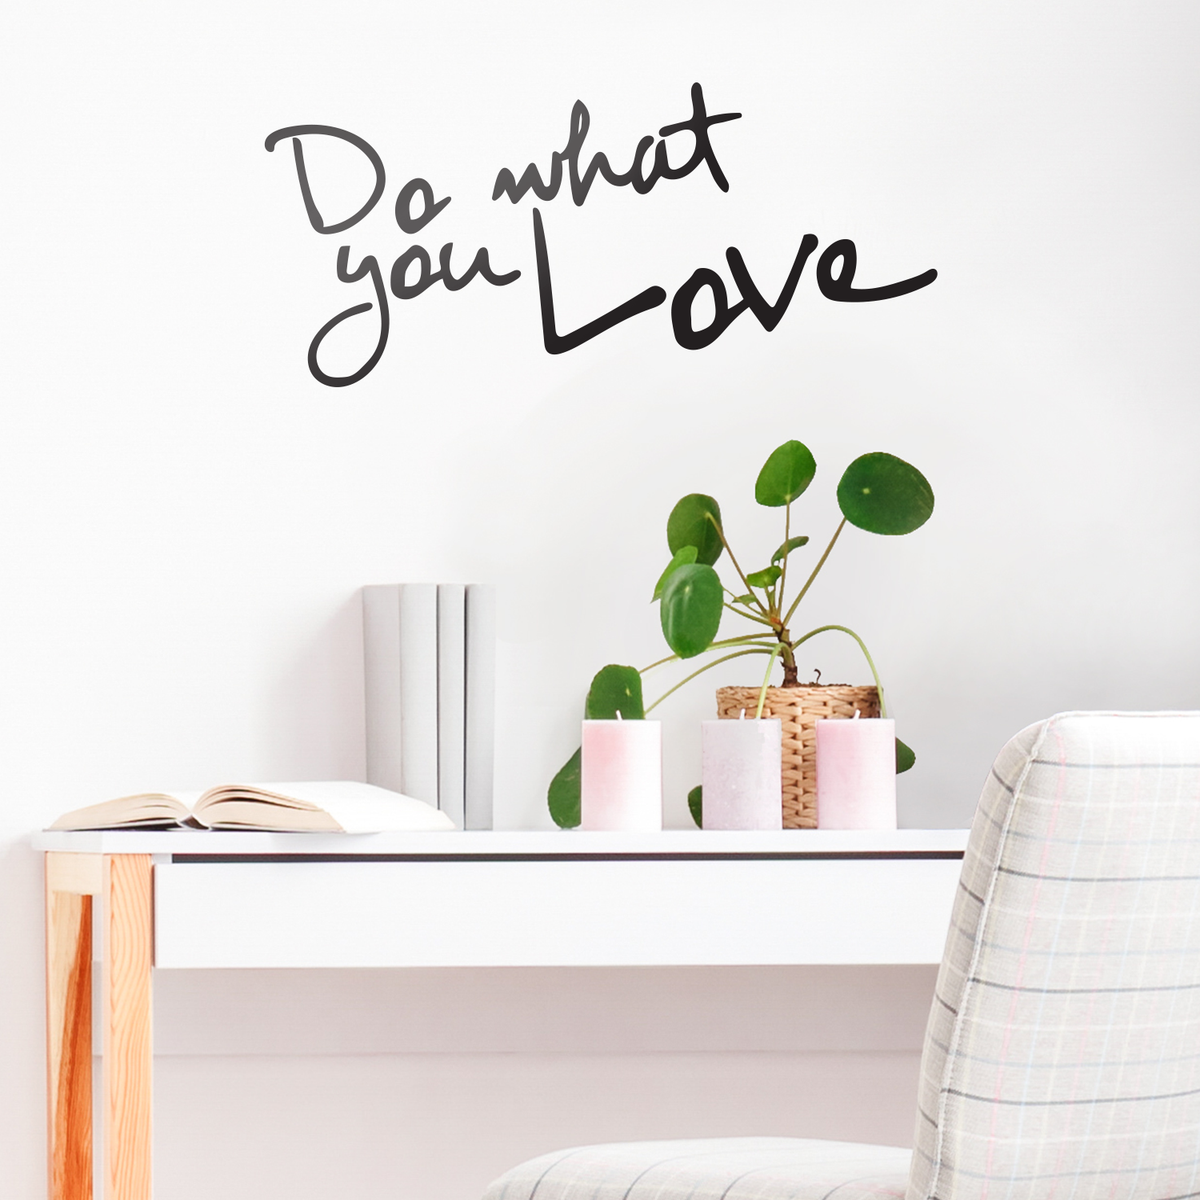 Do What You Love - Inspirational Life Quotes - Wall Art Decal 30